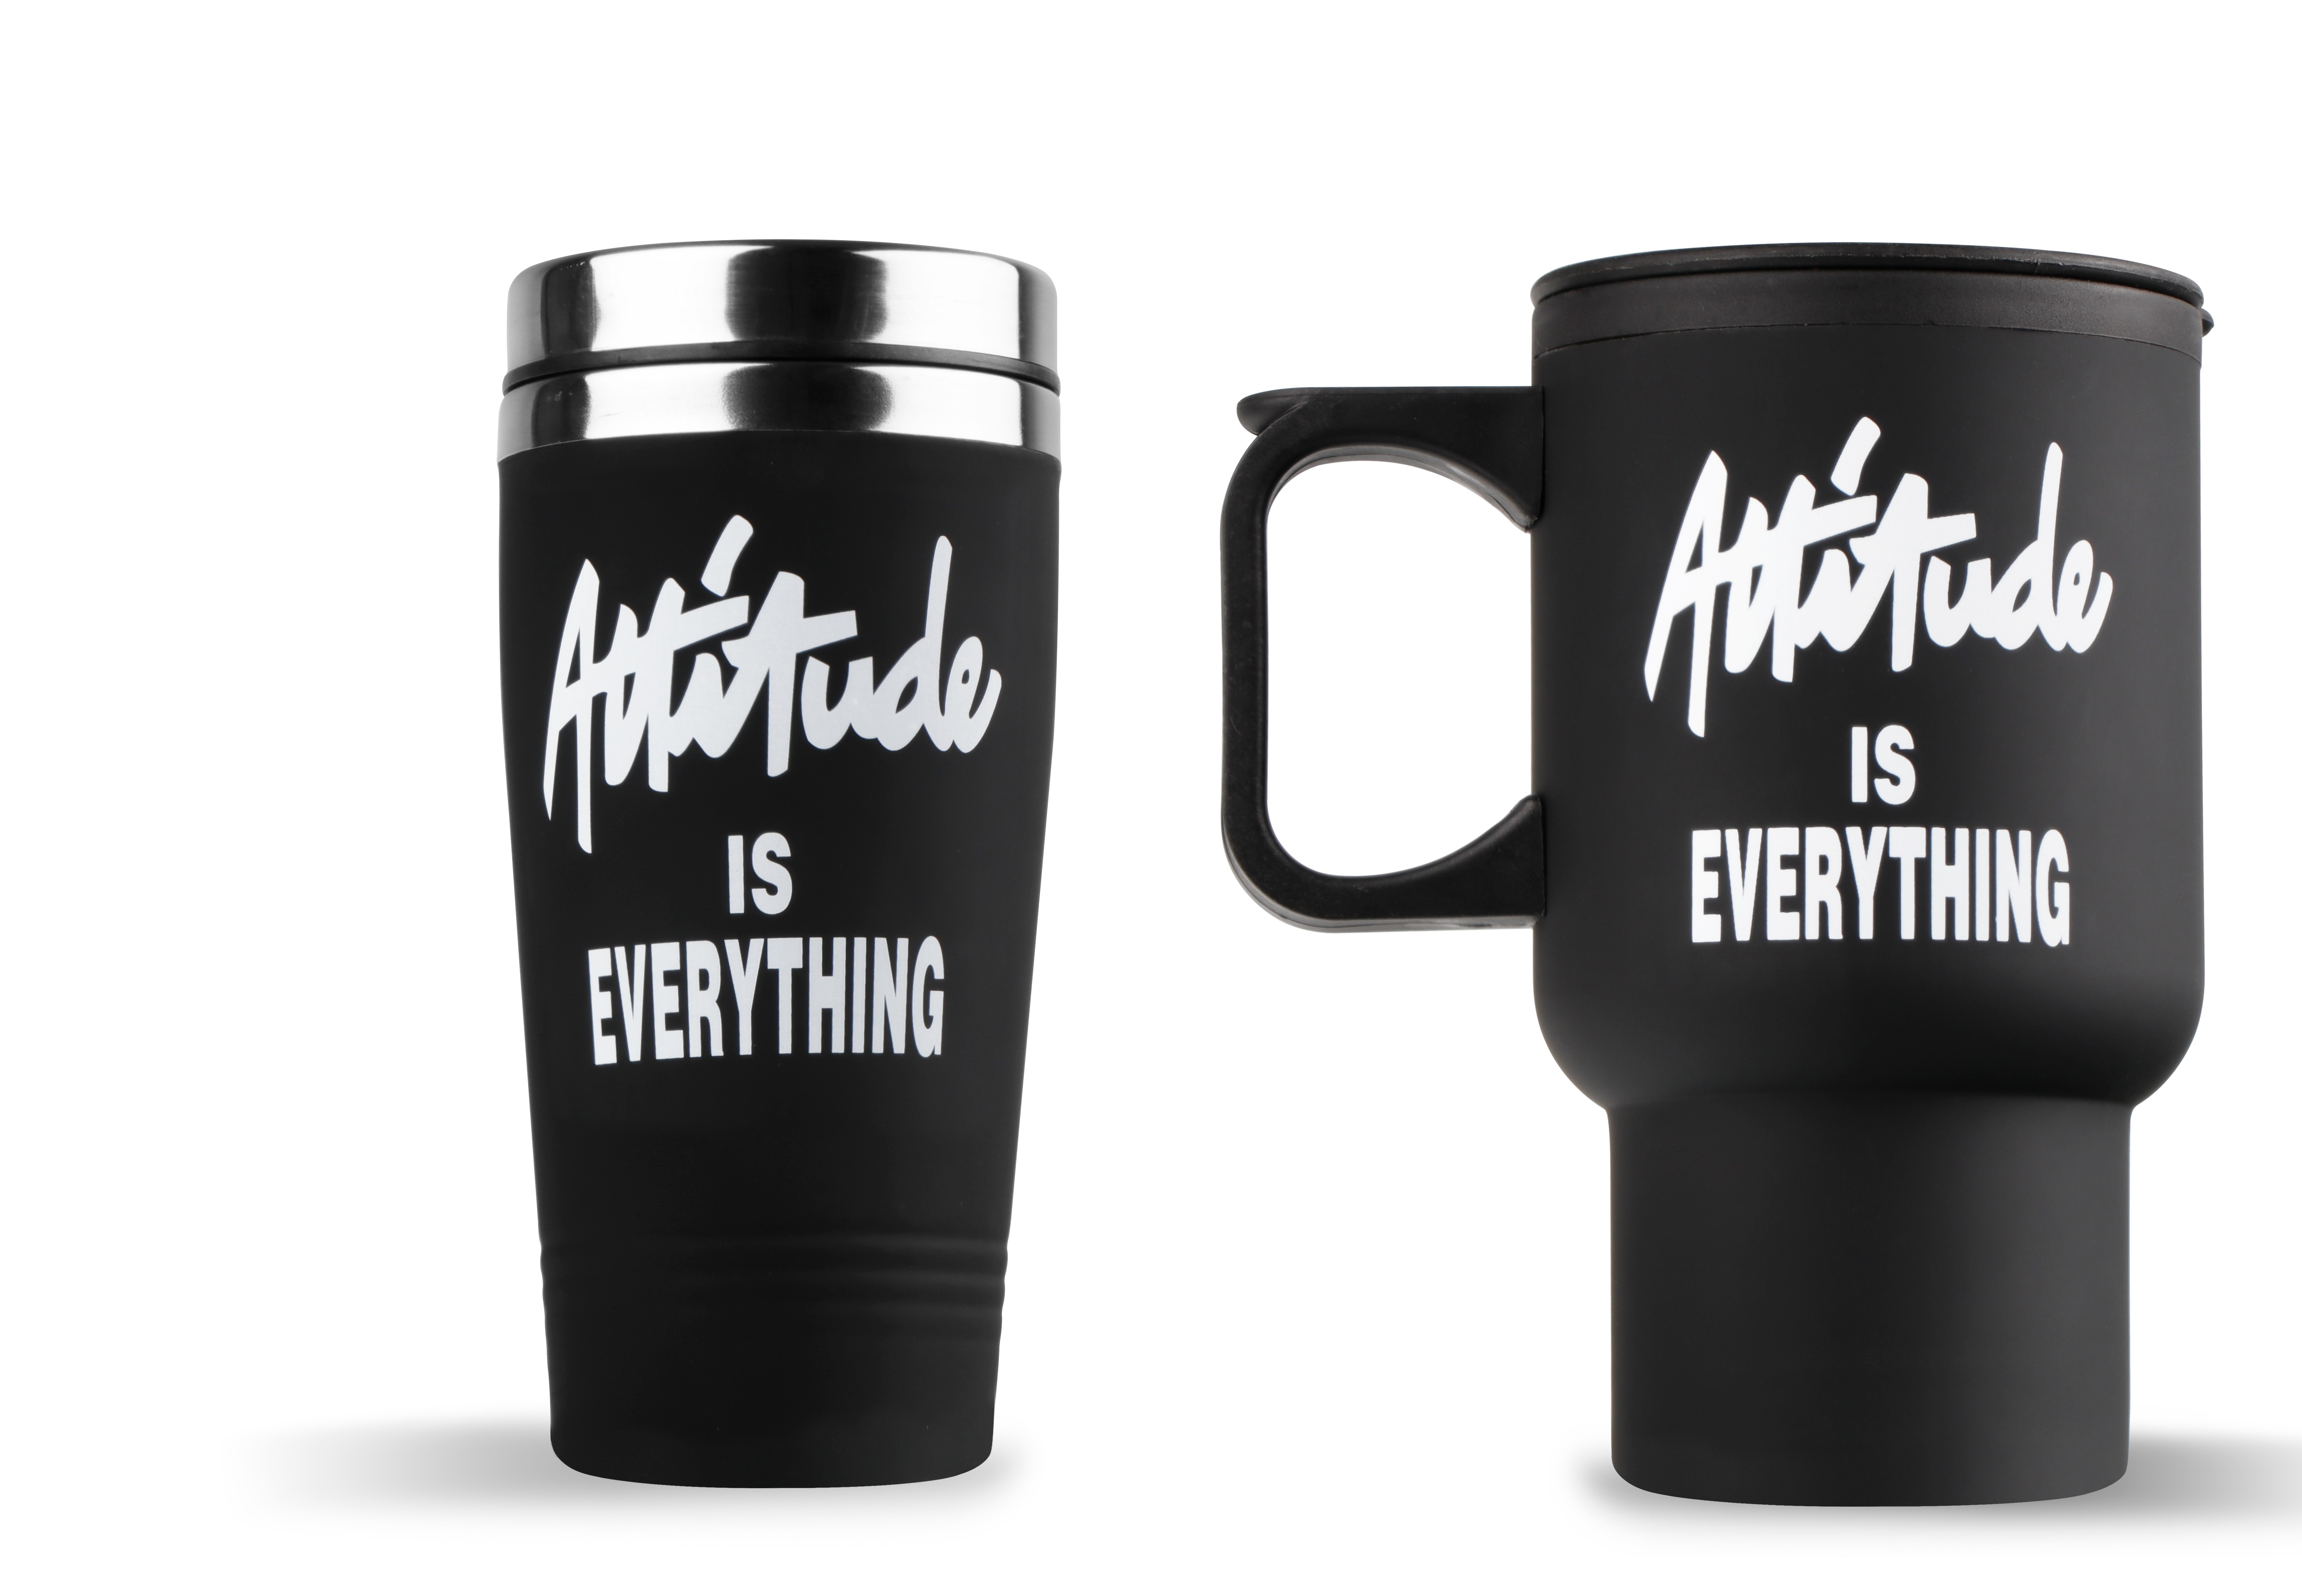 Archies | ARCHIES Attitude is EVERYTHING shaker & sipper combo